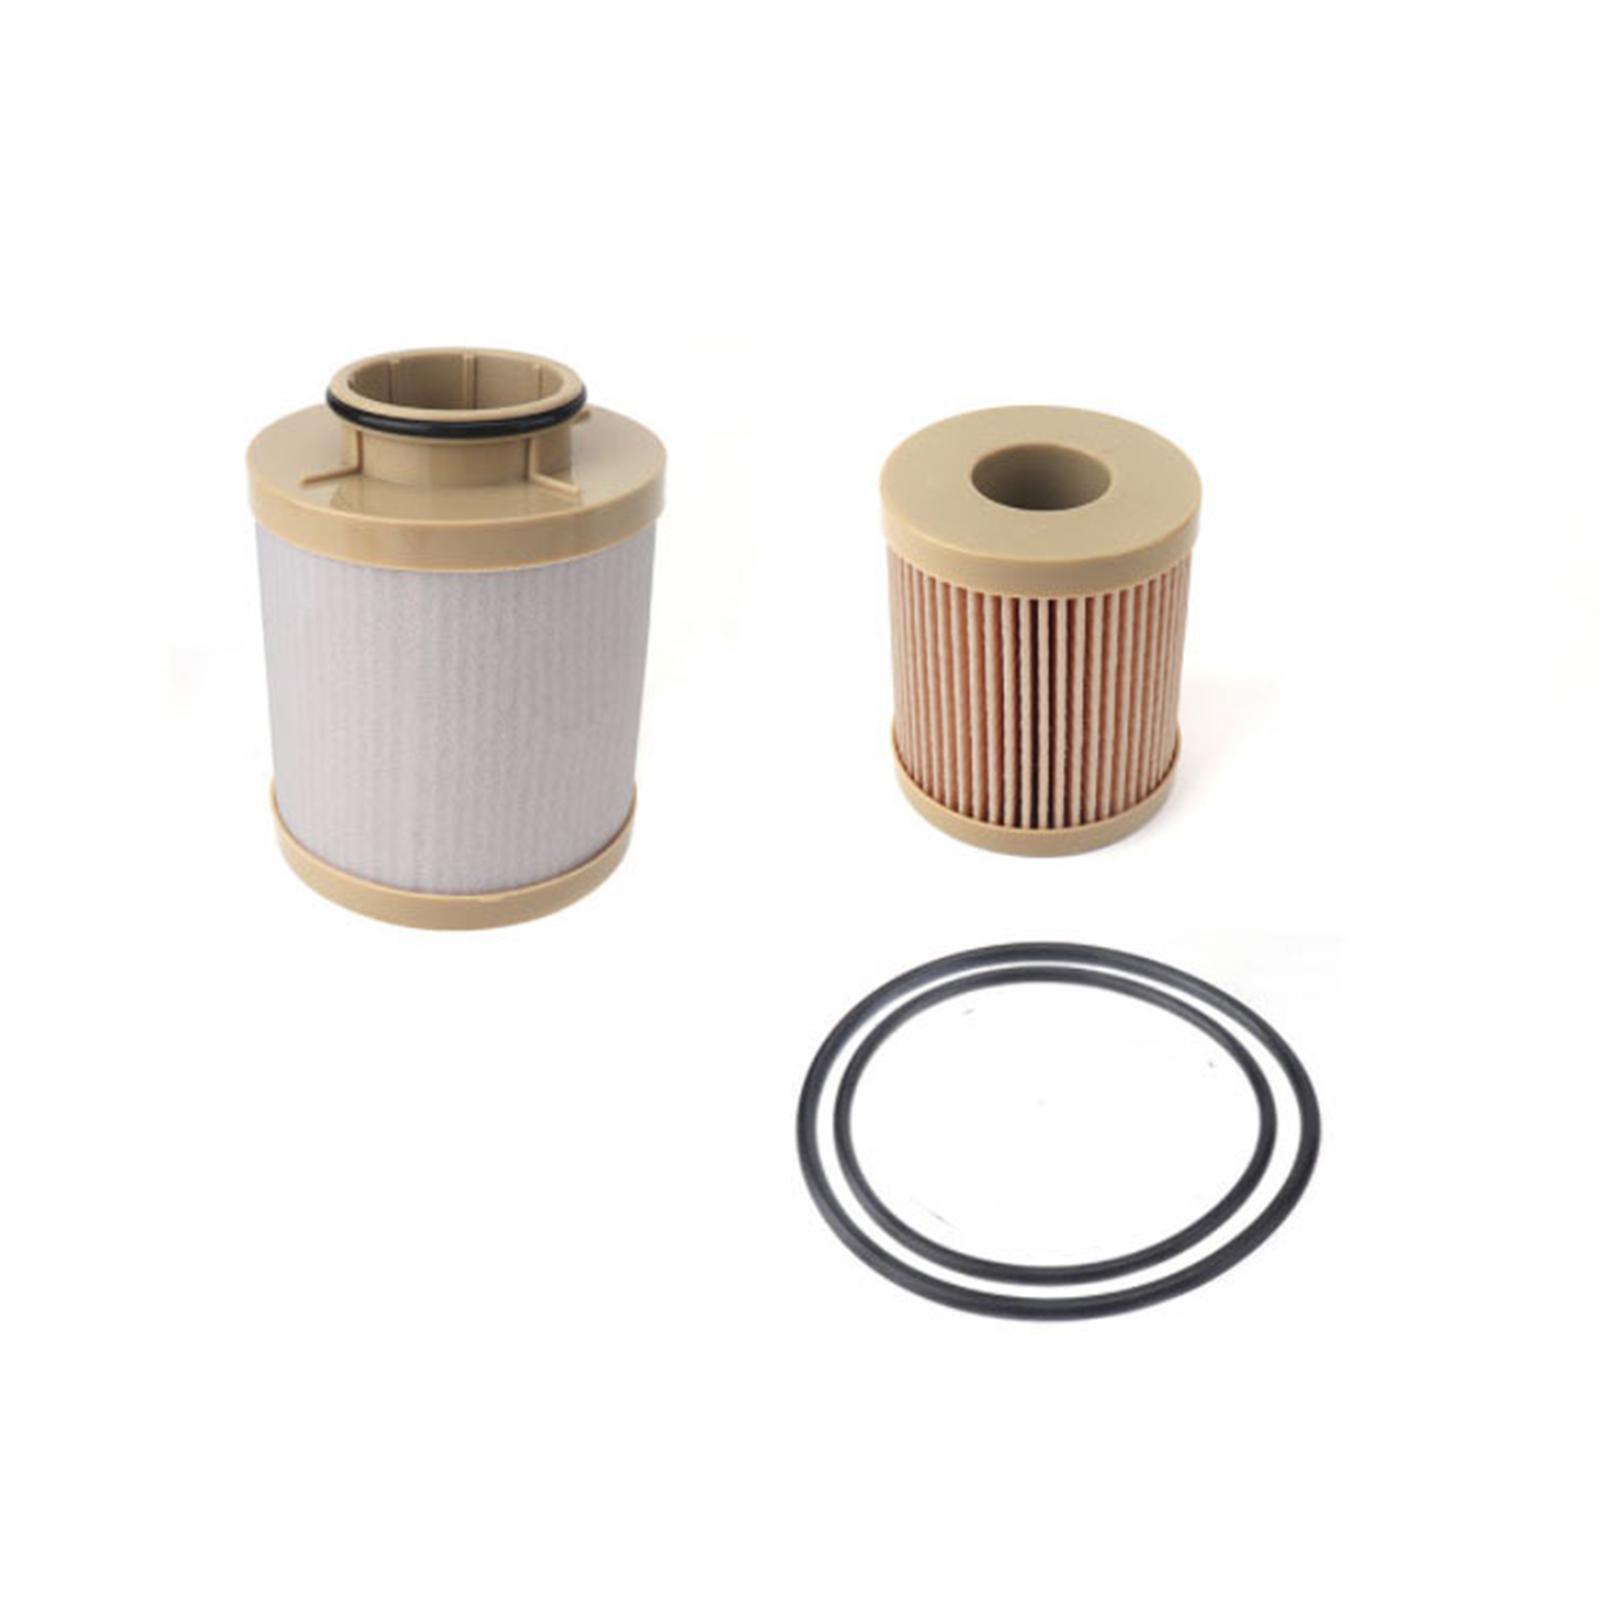 Fuel Filters Fit for Ford F250 Super Duty Truck 2008-2010 Spare Parts